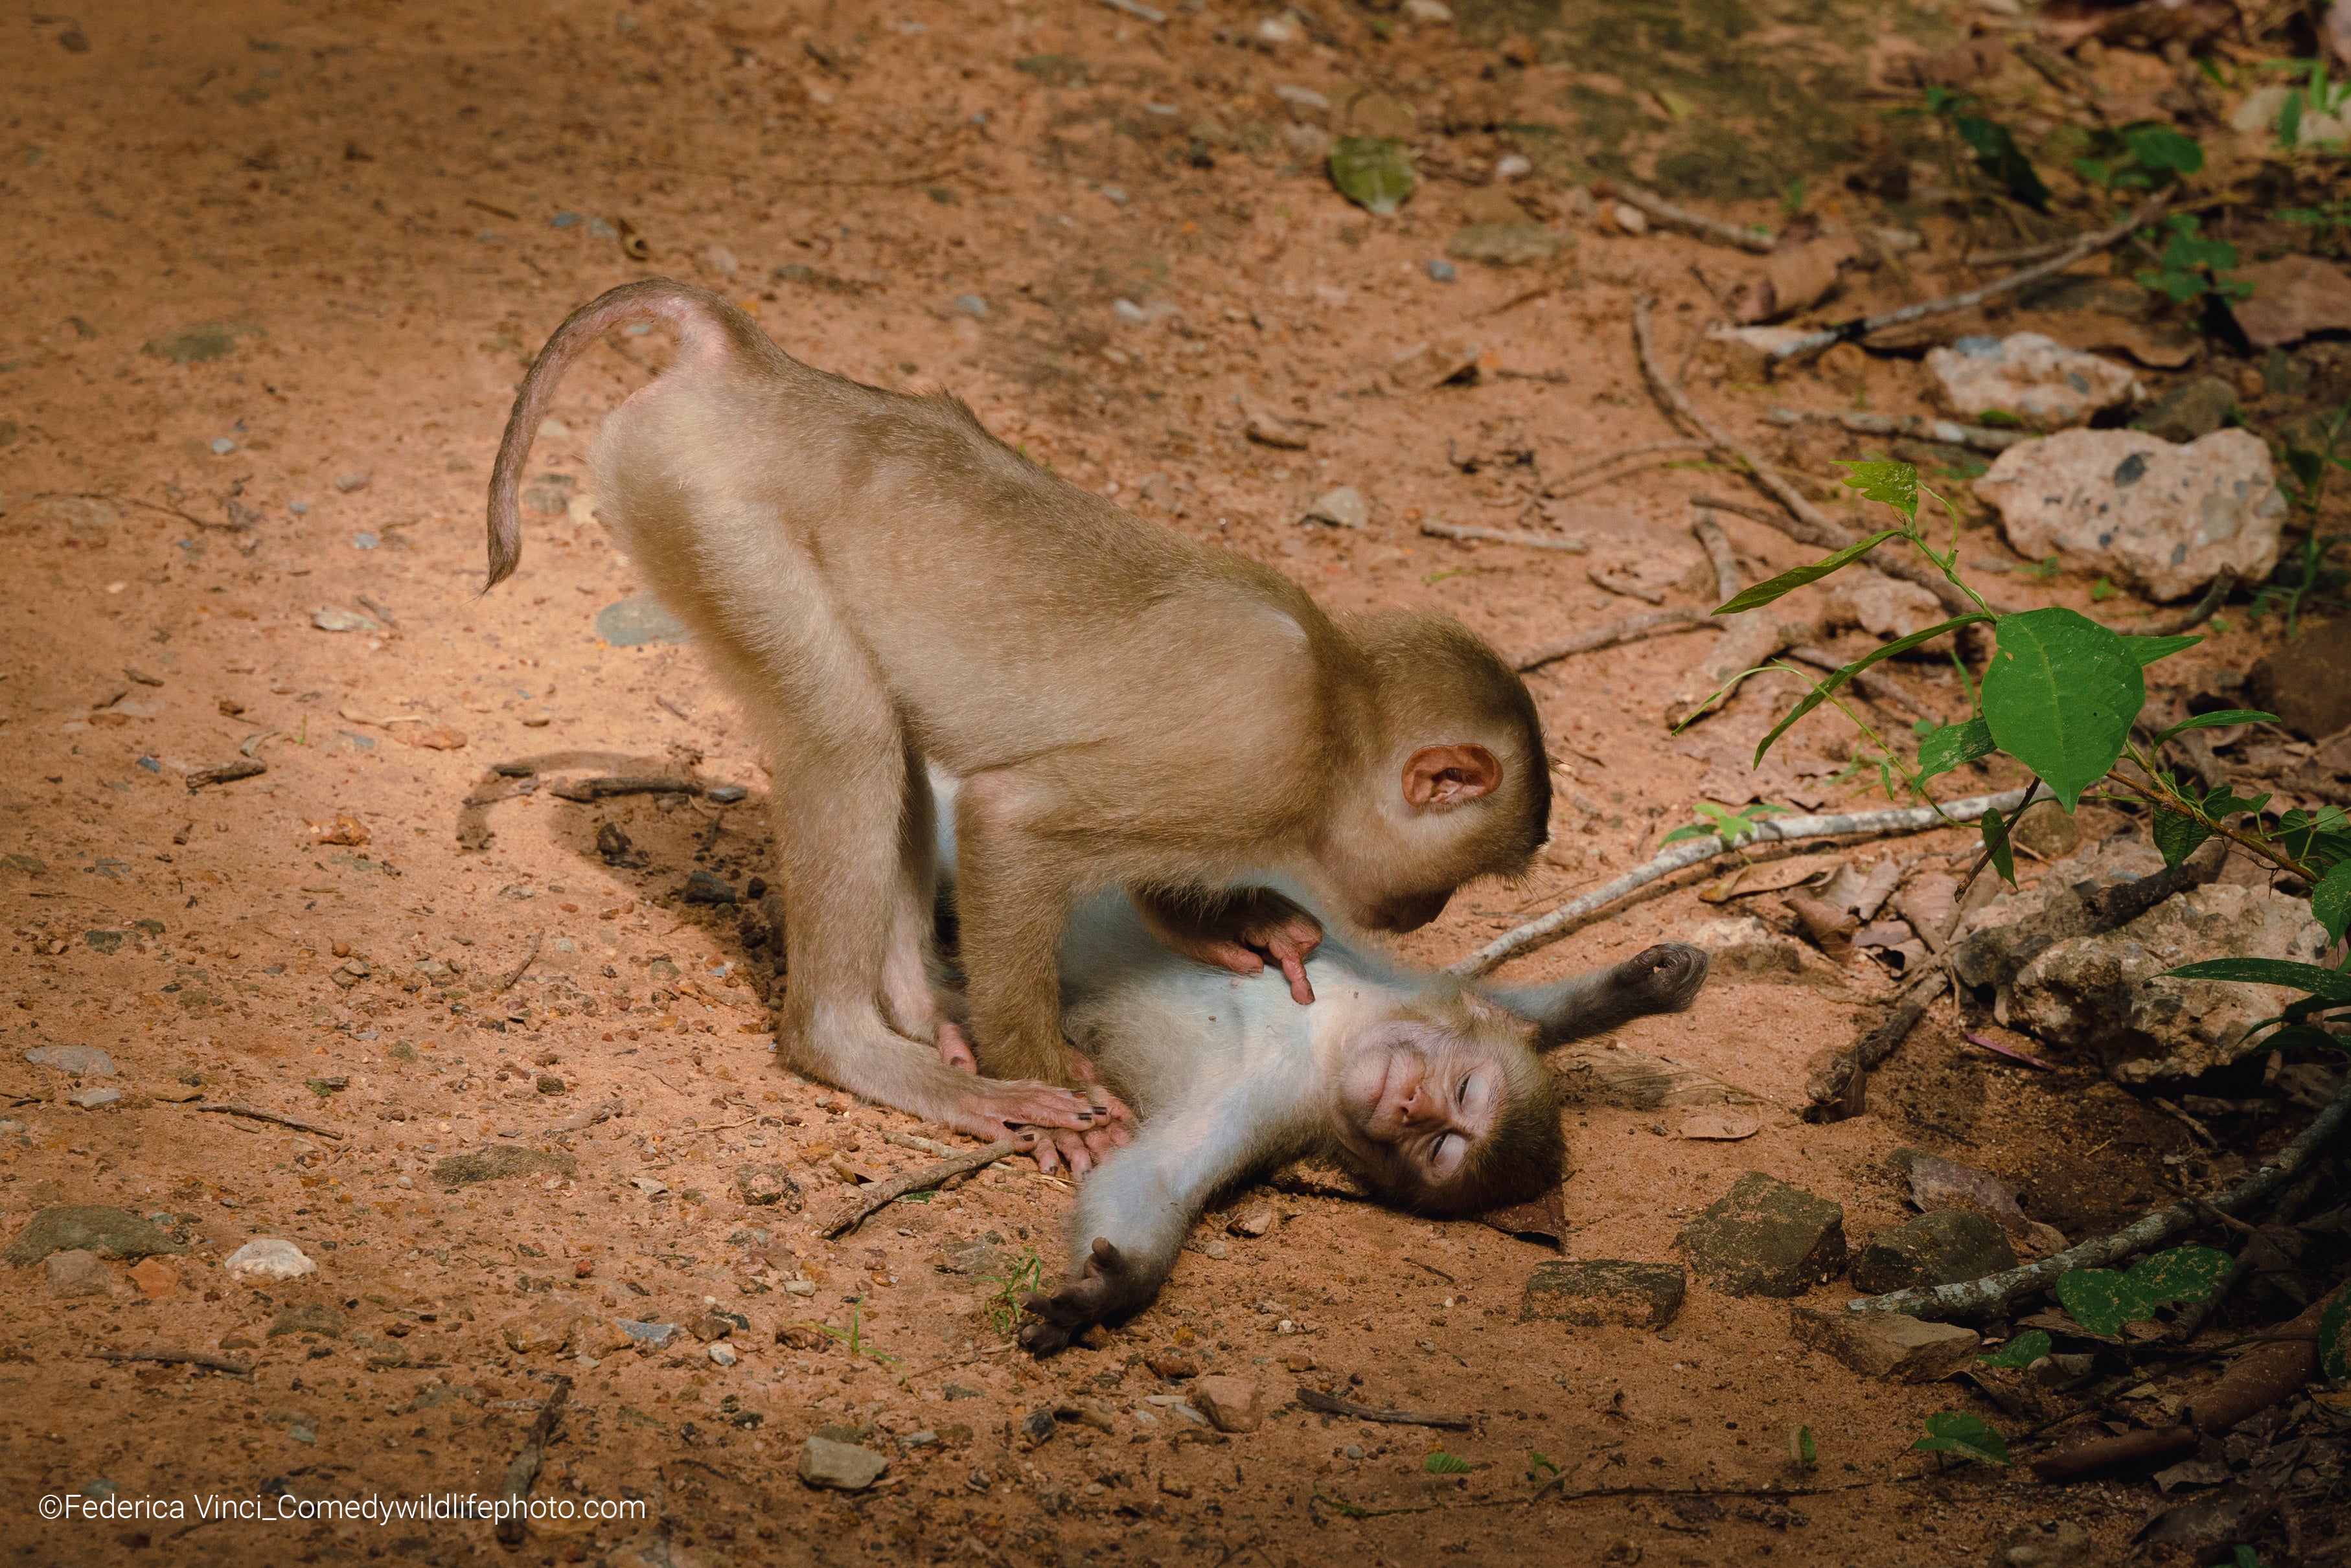 A monkey lies down, relaxed, as its friend checks on it. (Photo: ©  Federica Vinci / Comedywildlifephoto.com.)